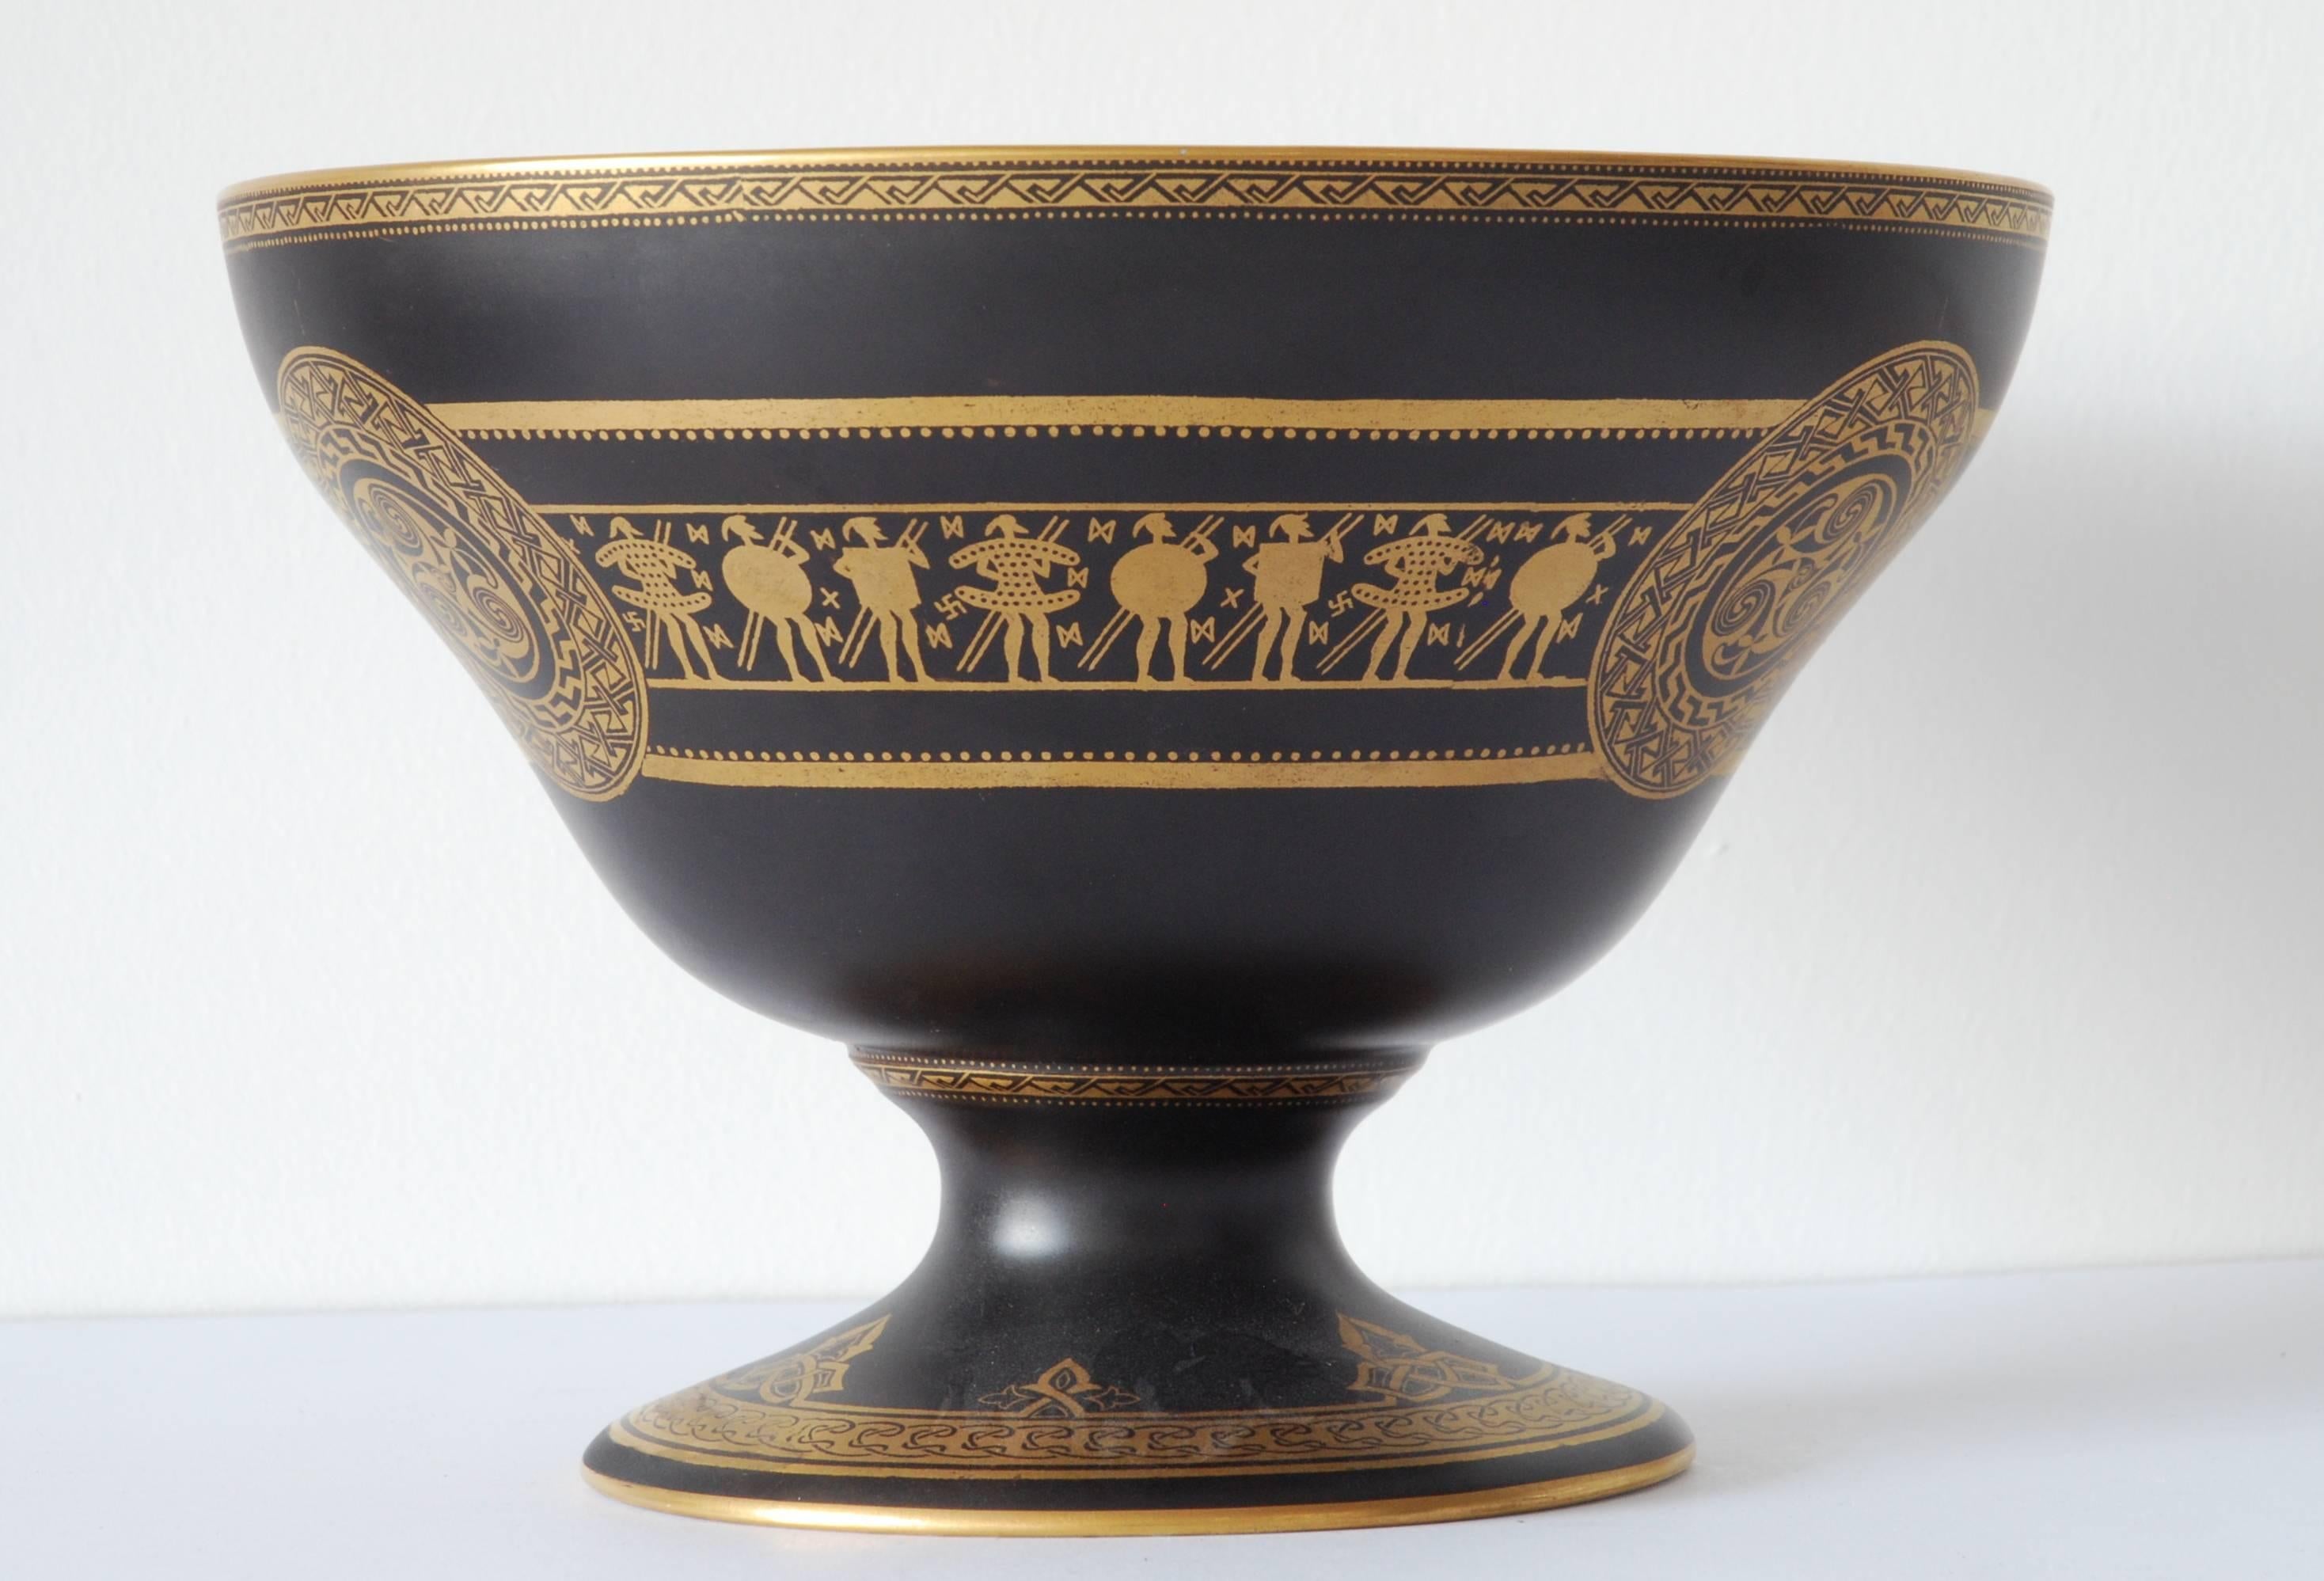 A scarce example of the Celtic pattern, from Daisy Makeig-Jones’ lustreware, in the form of a large ‘Melba Centre’ bowl. The stylized figures and the wonderful burnt orange interior combine to form a striking example of Art Deco.